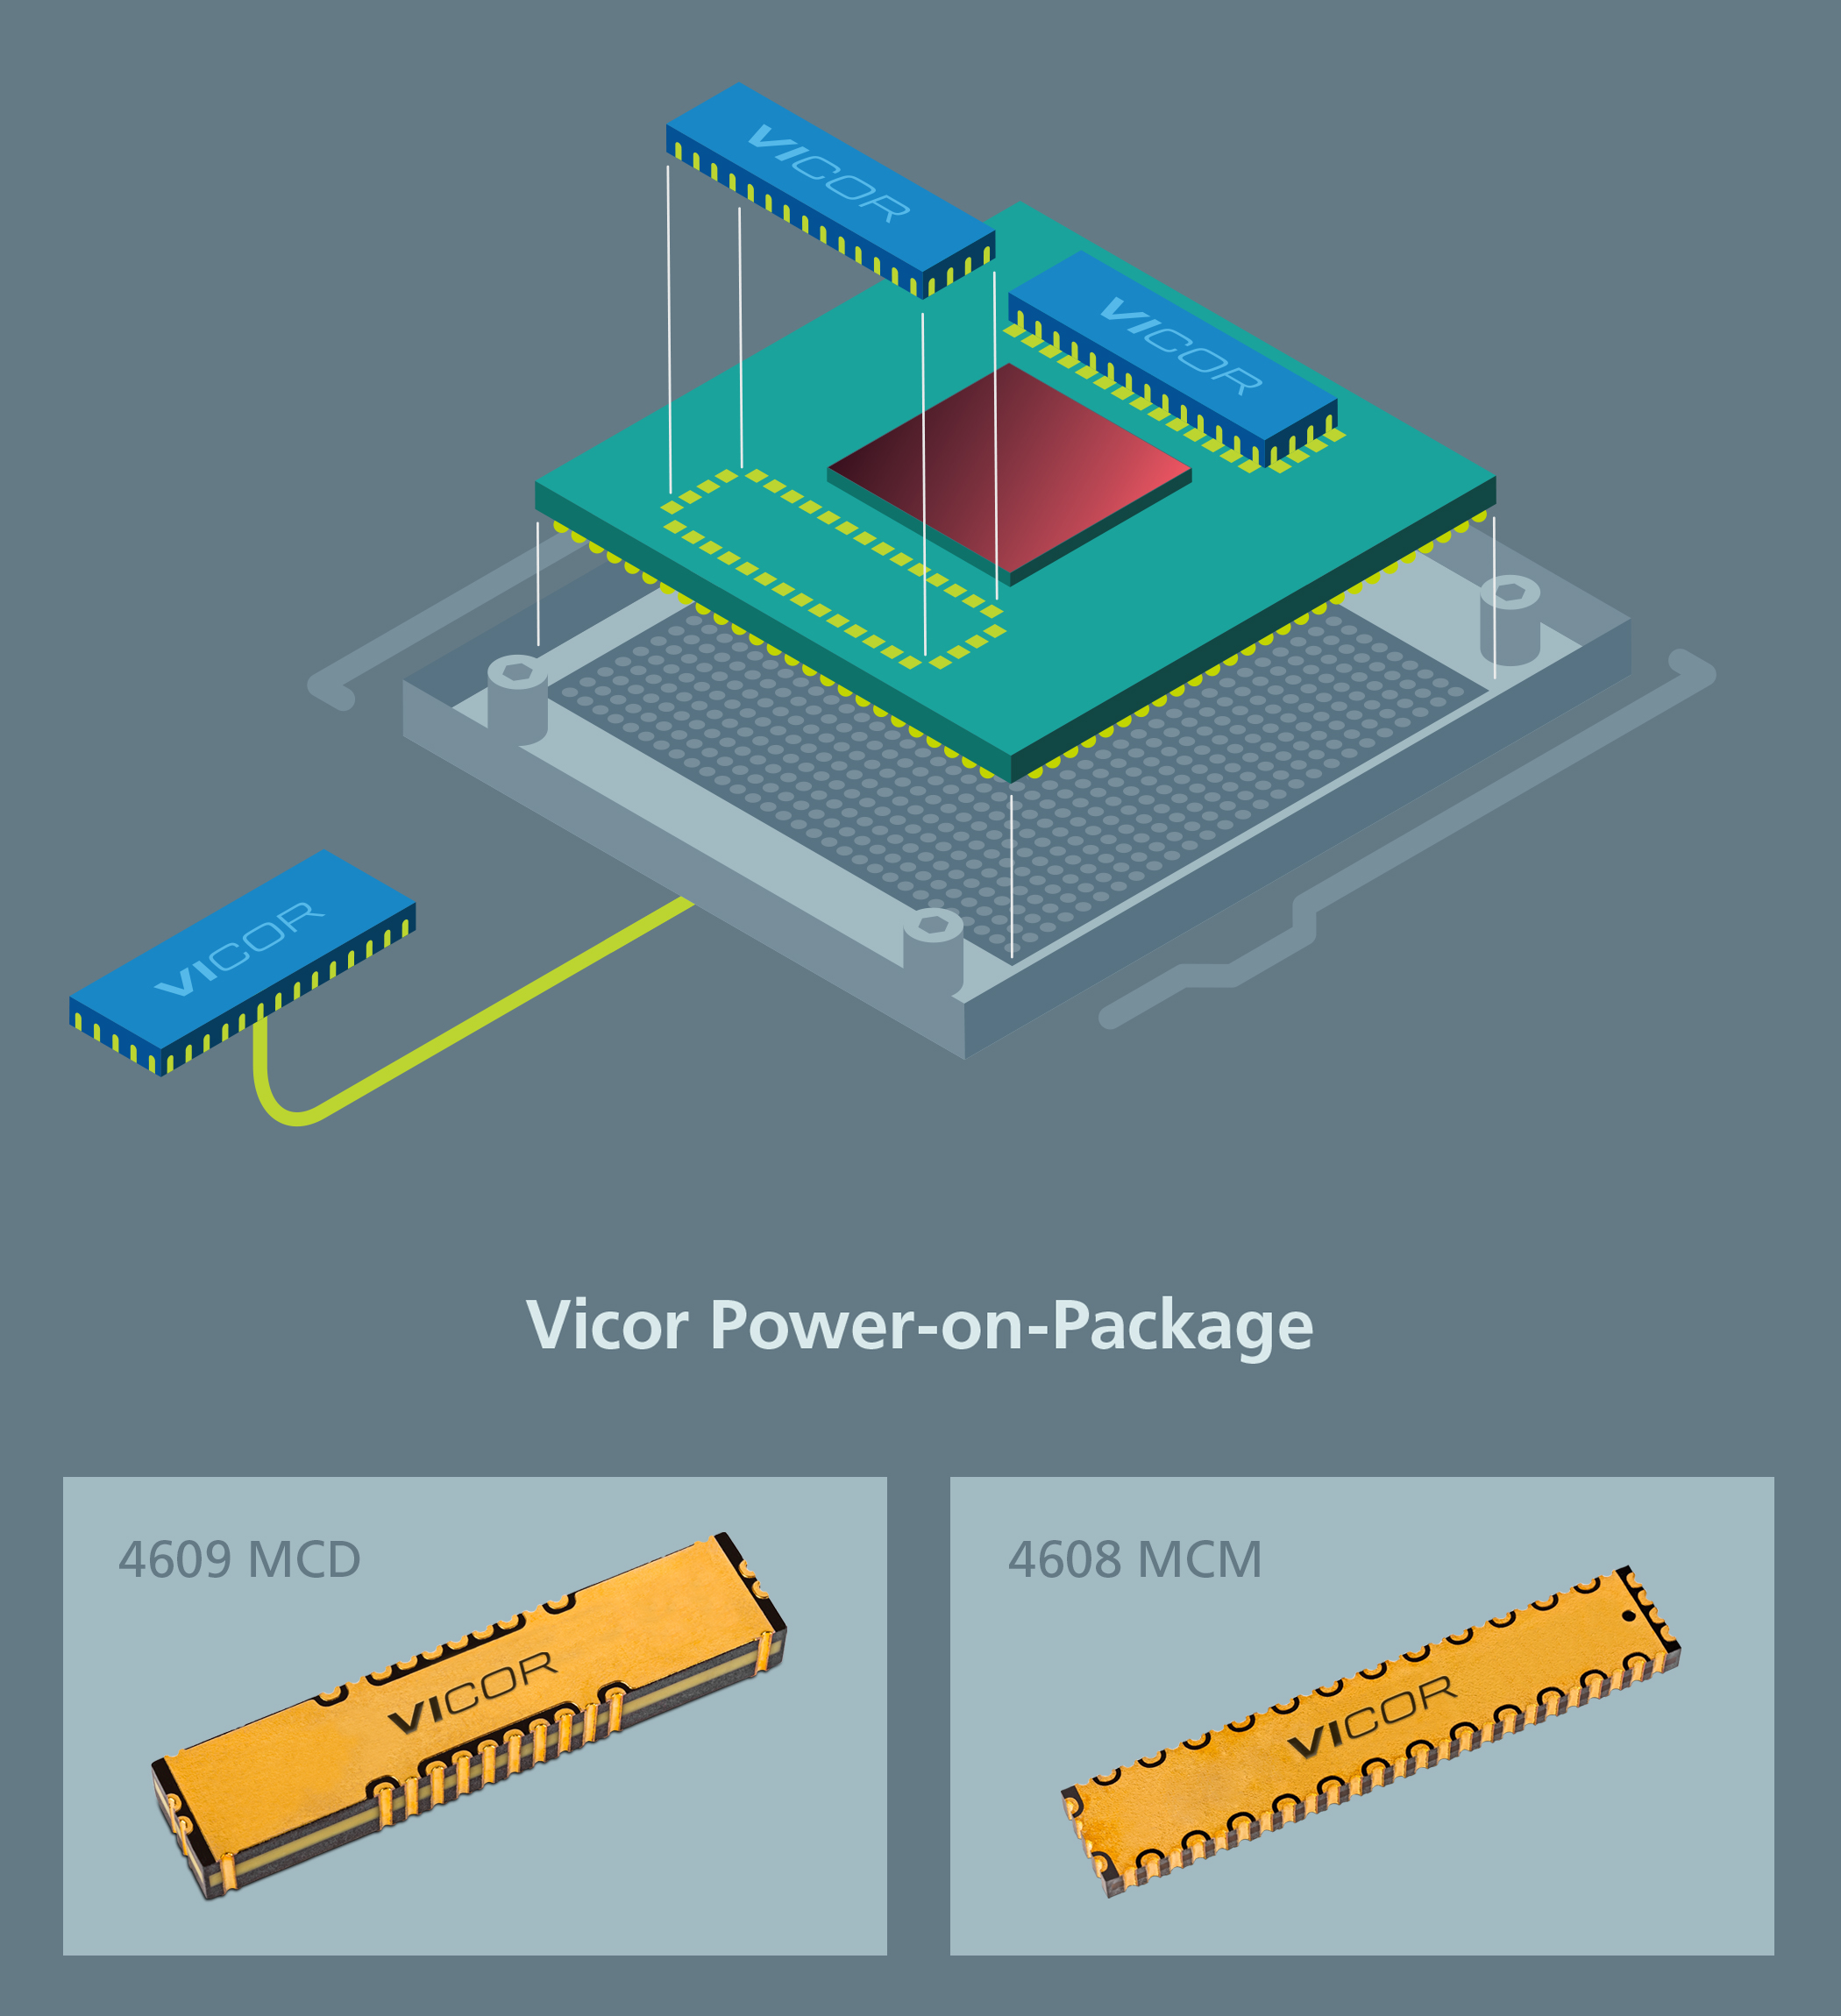 Power-on-Package Solution Provides up to 1,000A Peak Current to Enable Higher XPU Performance